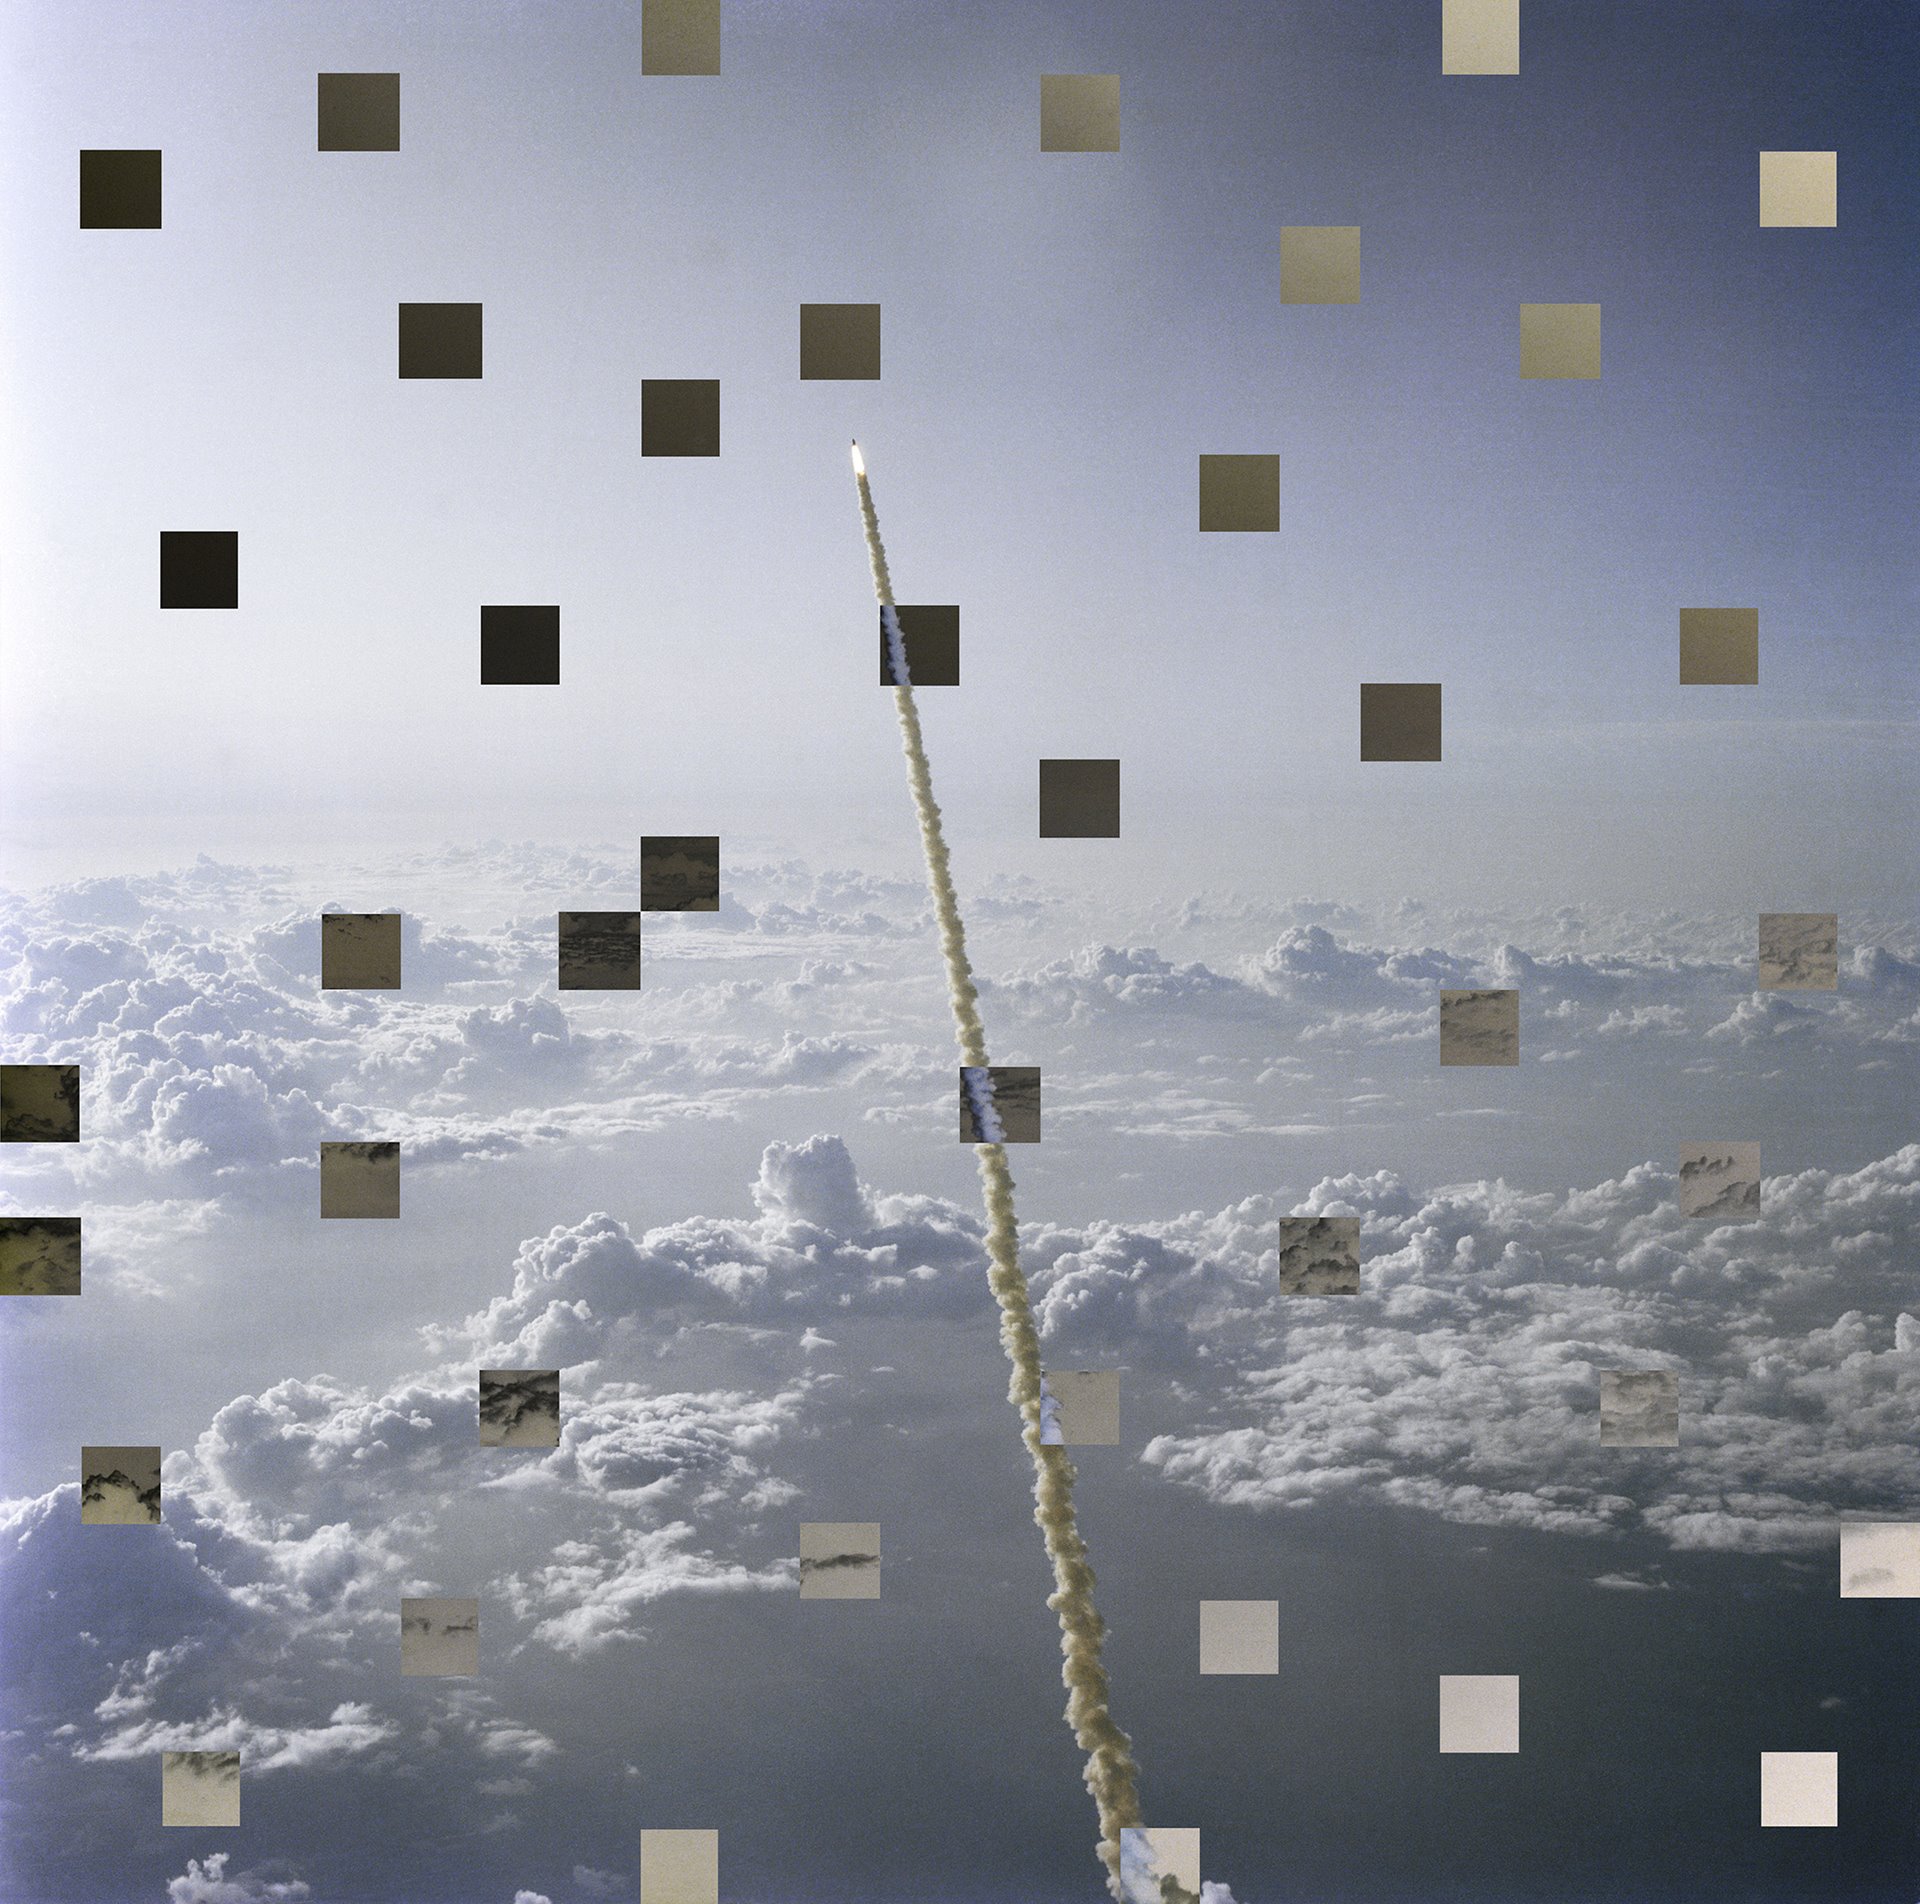 A manipulated NASA archival image of Dr. Sally Ride&rsquo;s STS-7 mission launch from Kennedy Space Center in June 1983, the first space flight with a known LGBTQI+ person, although this was only revealed after her death. There have been over 600 astronauts trained around the world. The 43 inverted squares are out of a grid of 600, representing the demographic proportion of members of the LGBTQI+ community in the general population.